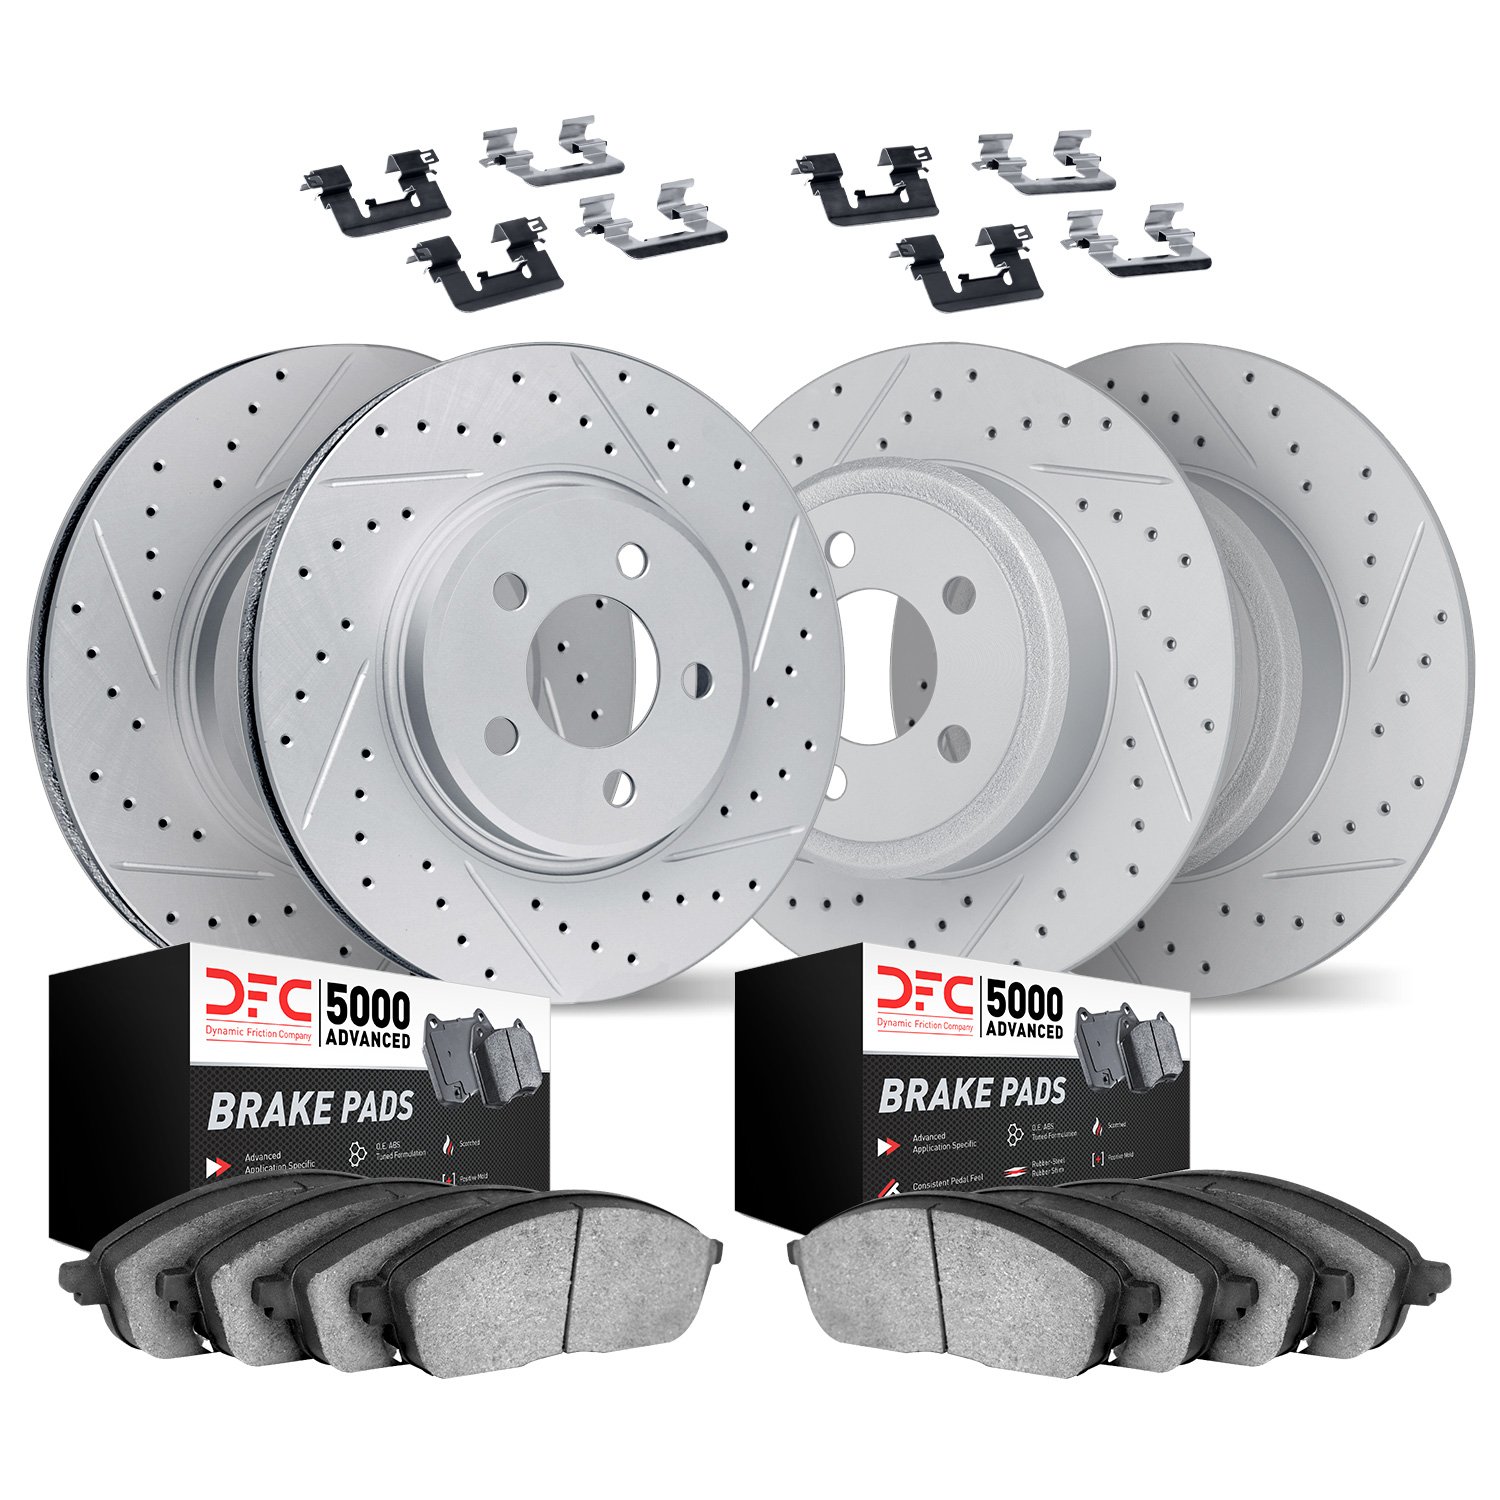 2514-59041 Geoperformance Drilled/Slotted Rotors w/5000 Advanced Brake Pads Kit & Hardware, Fits Select Acura/Honda, Position: F